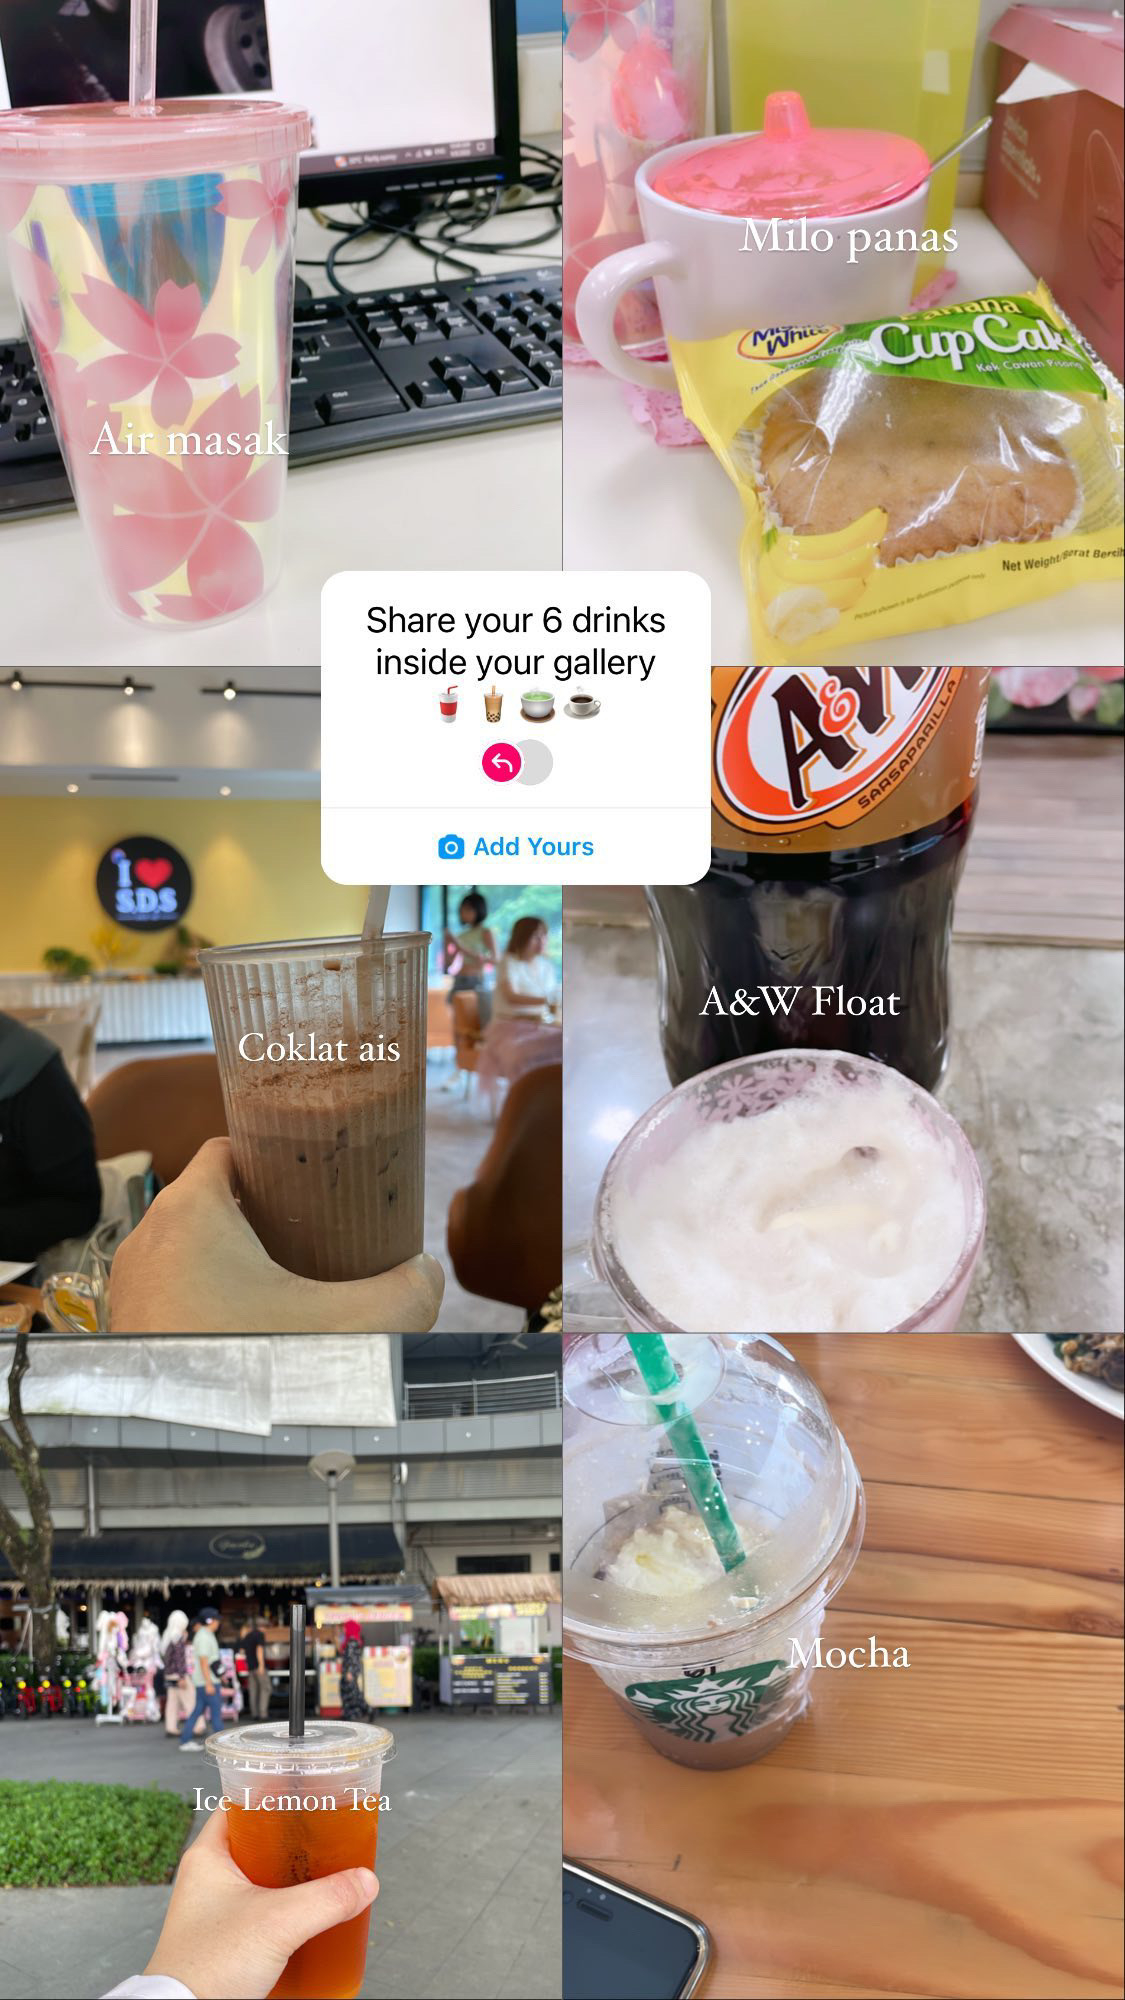 Wordless Wednesday - Share 6 drink inside your gallery